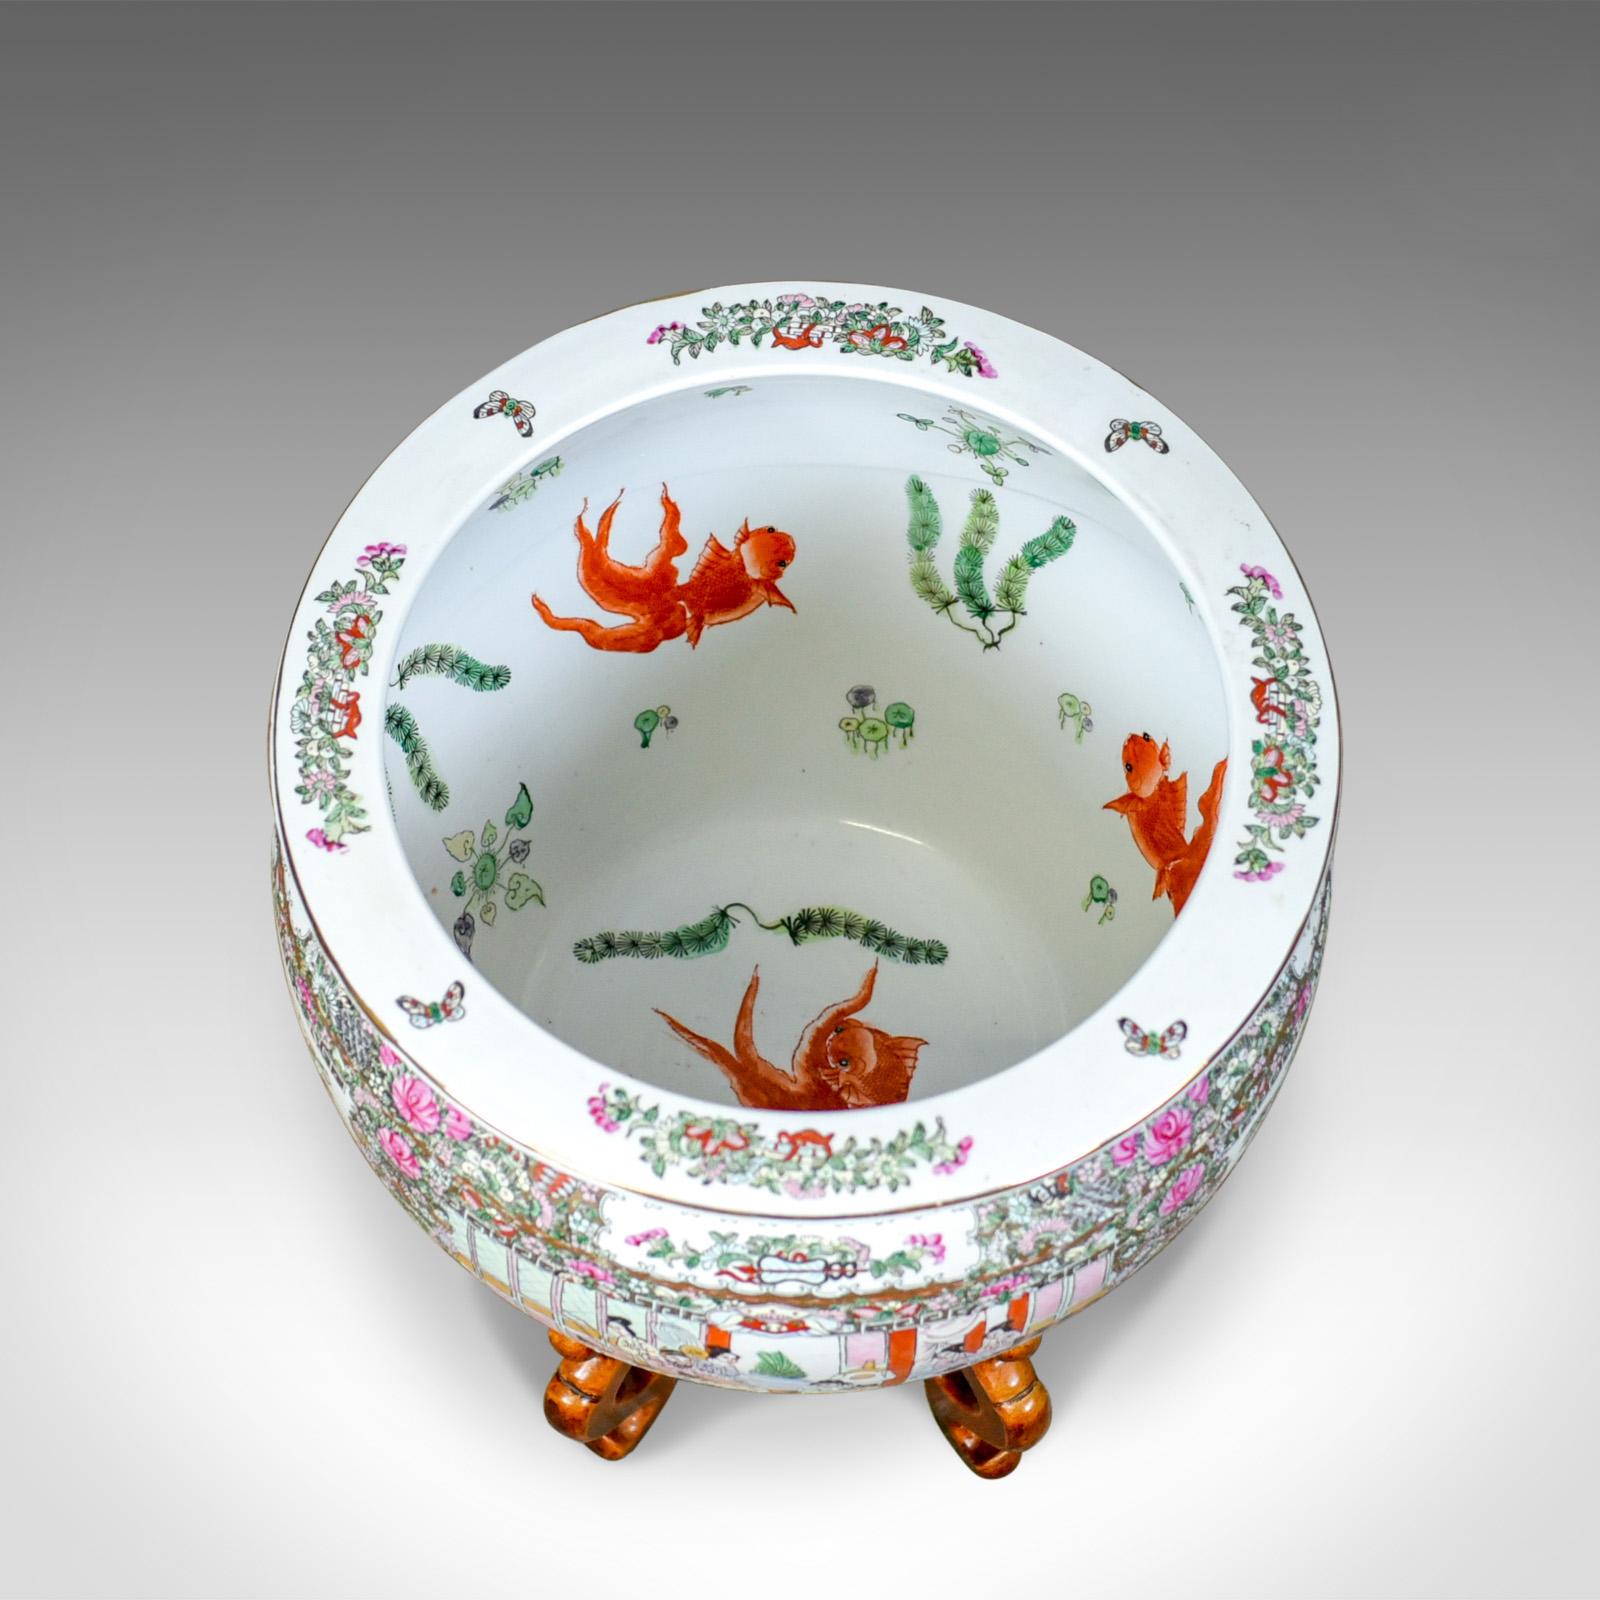 This is a vintage fish bowl on stand, a jardinière plant stand in excellent condition. This Chinese ceramic pot dates from the mid-20th century.

Beautifully presented pottery in 'famille rose' hues 
Profusely decorated with stylised foliate